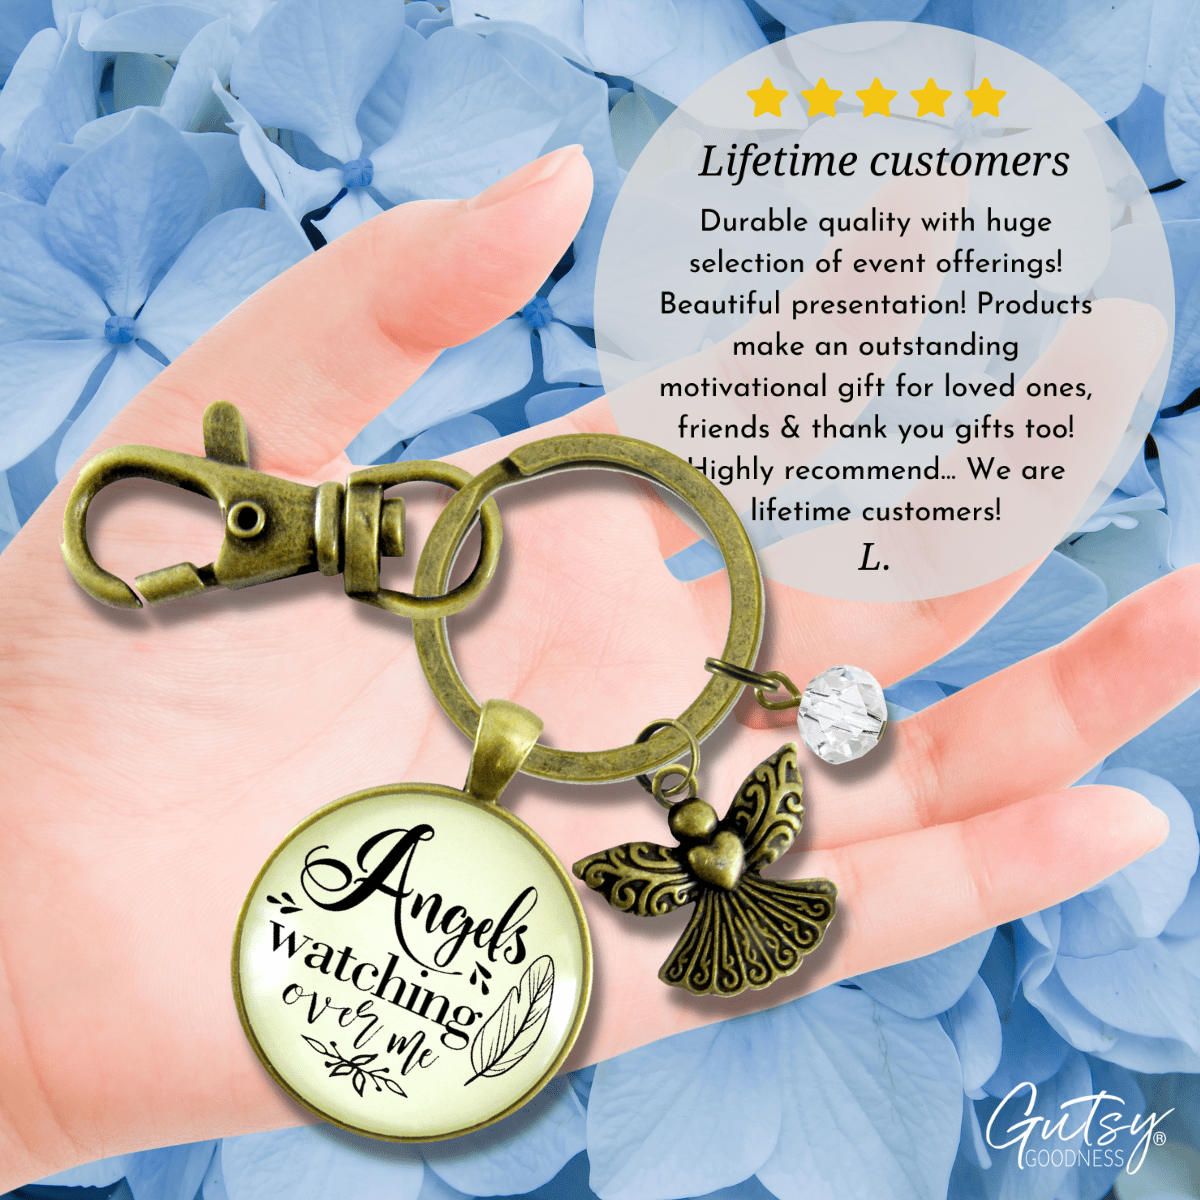 Angels Watching Over Me Keychain Guardian Angel Memorial Gift Heaven Inspired - Gutsy Goodness